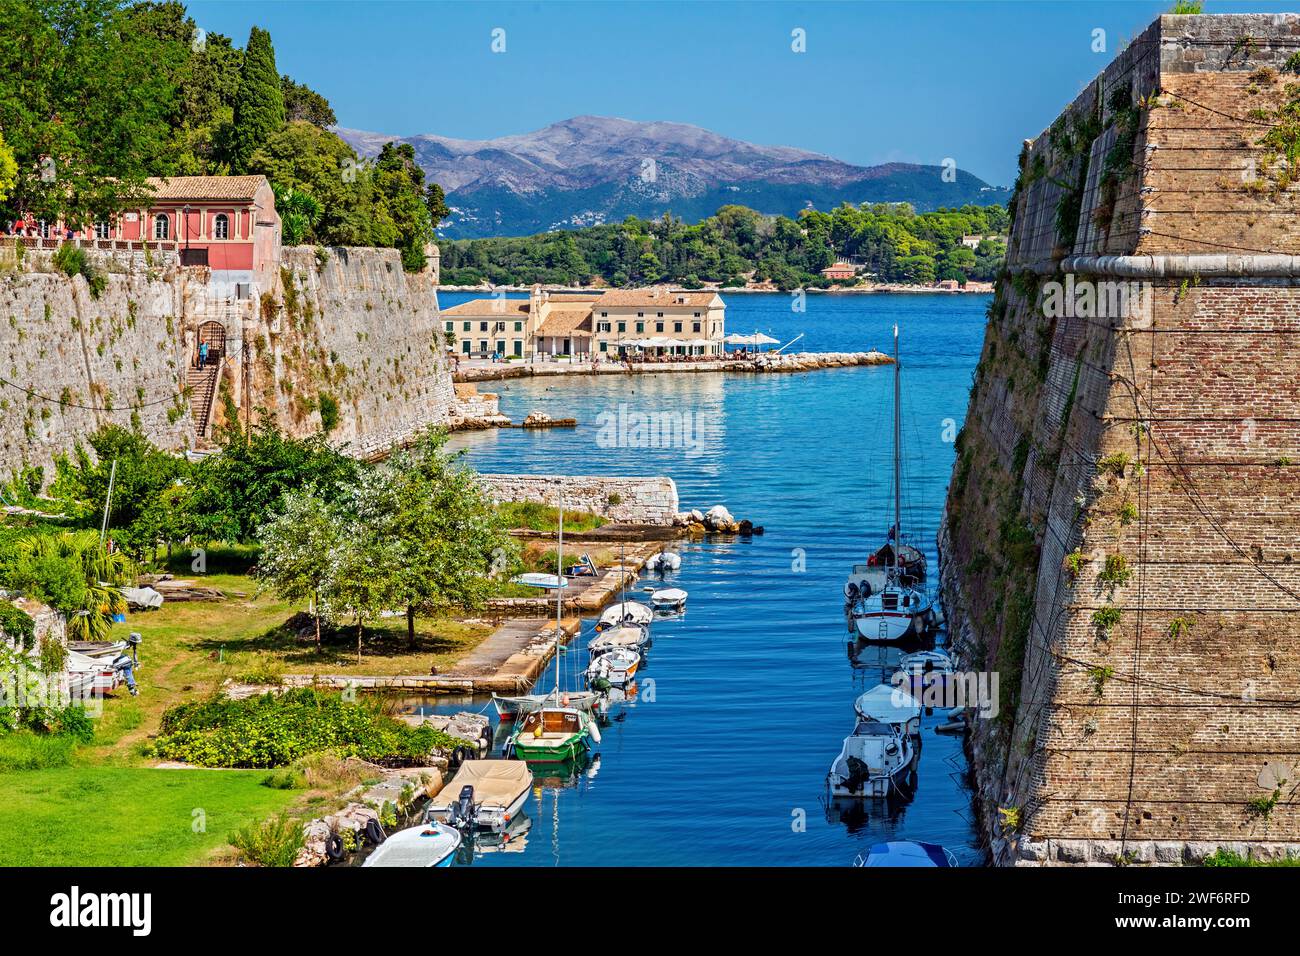 Greece, Corfu (or 'Kerkyra') island. The canal called 'Contrafossa', that separates the Old Fort from the old town. in the background, Faliraki beach. Stock Photo